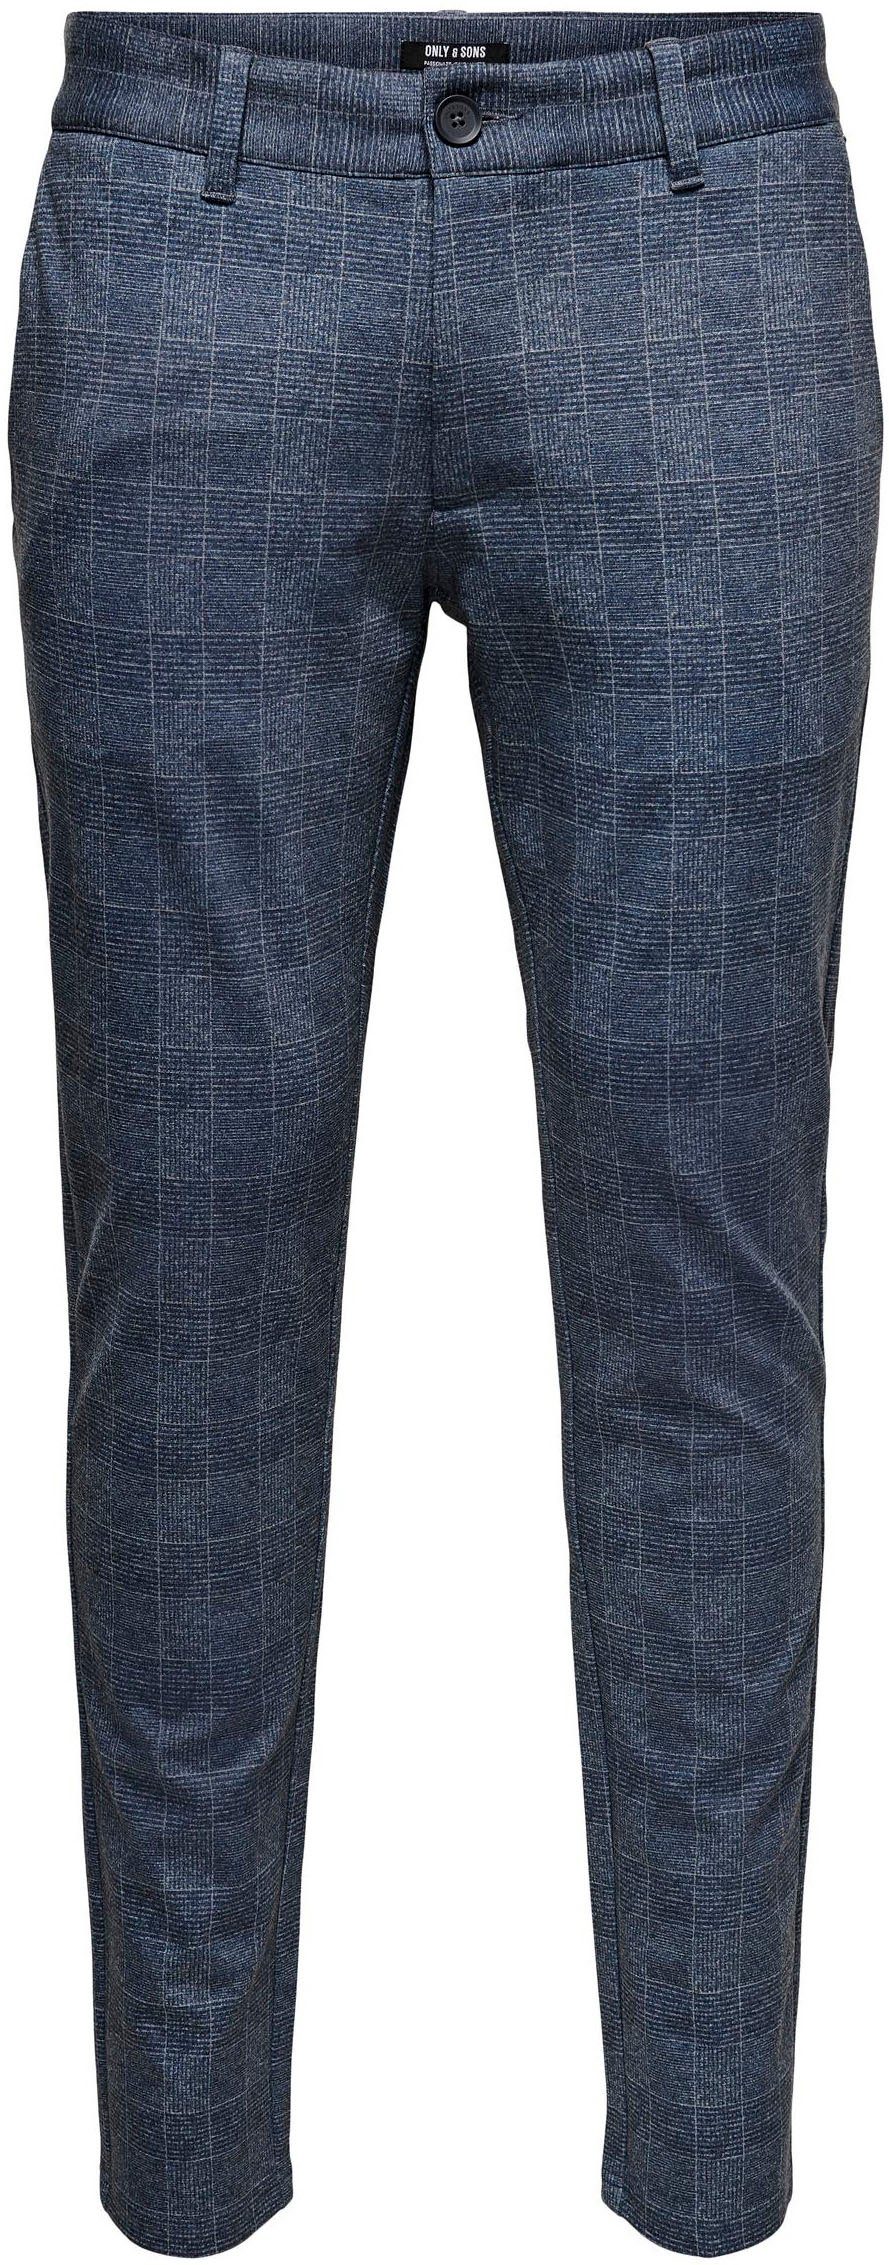 ONLY & SONS Chinohose PANTS CHECK blau kariert MARK